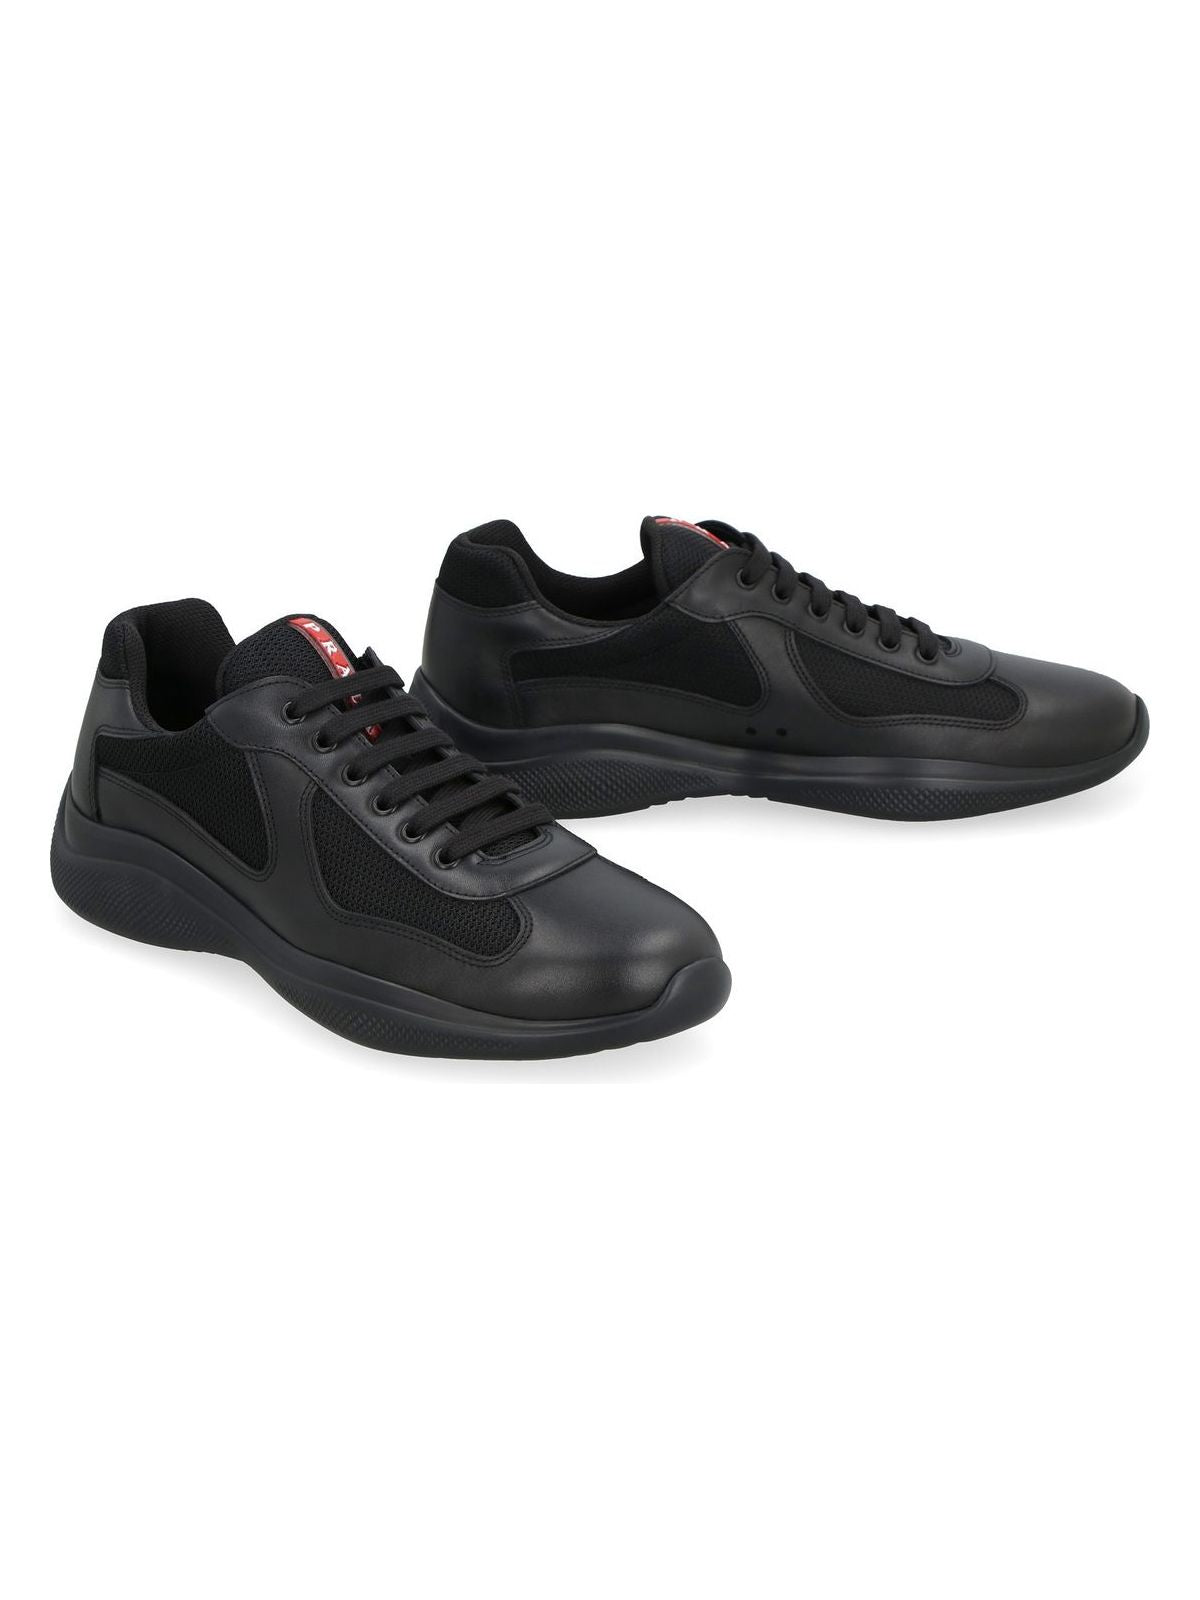 F0002 PRADA LEATHER LACE-UP SNEAKERS